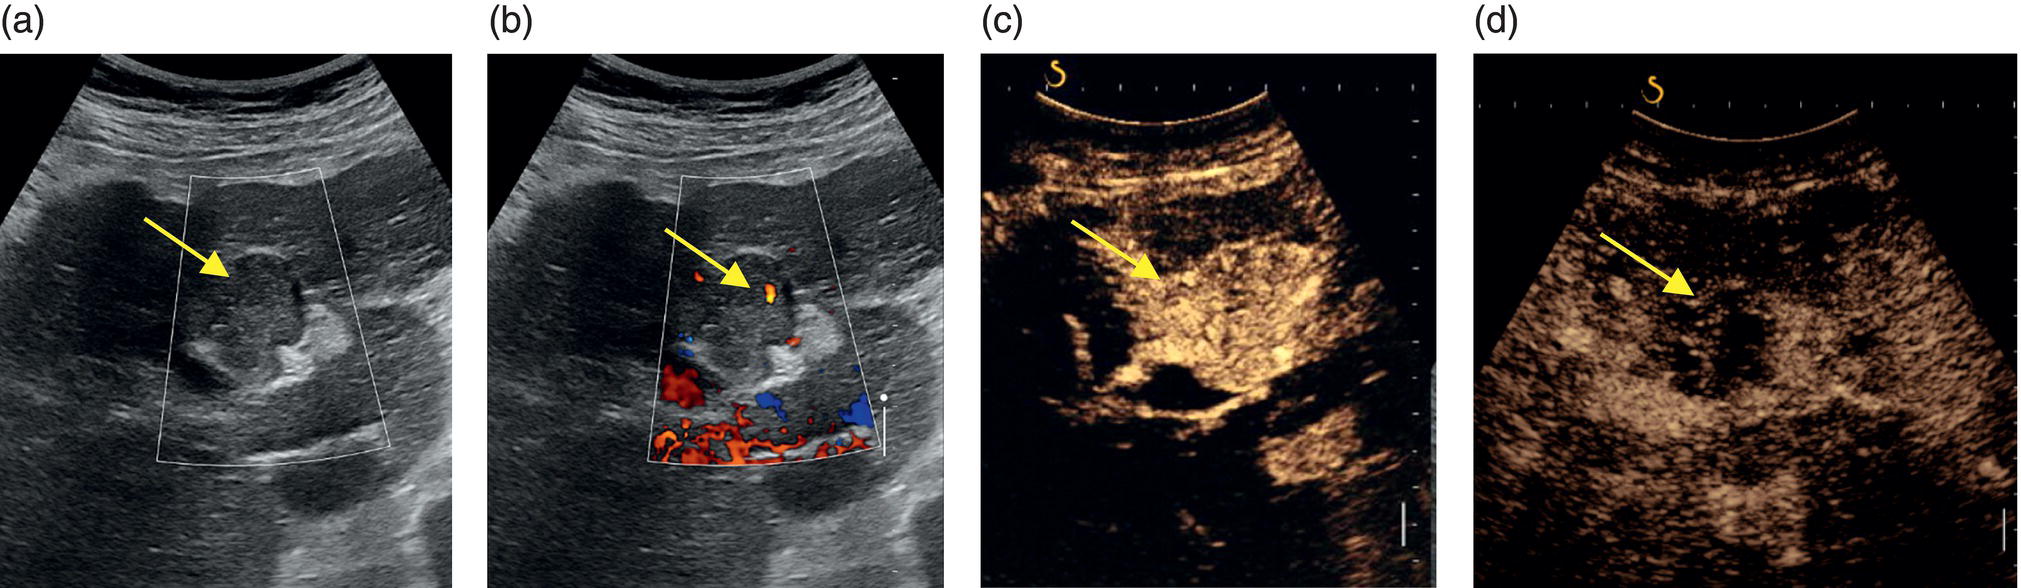 A set of four ultrasounds of a patient affected by neoplastic invasion on the left branch of the portal vein. A and b. An arterial flow is present and there is a wall disruption with clot development. C. Large tumor exposure. D. The arrow indicates a neoplastic invasion of the portal vein.